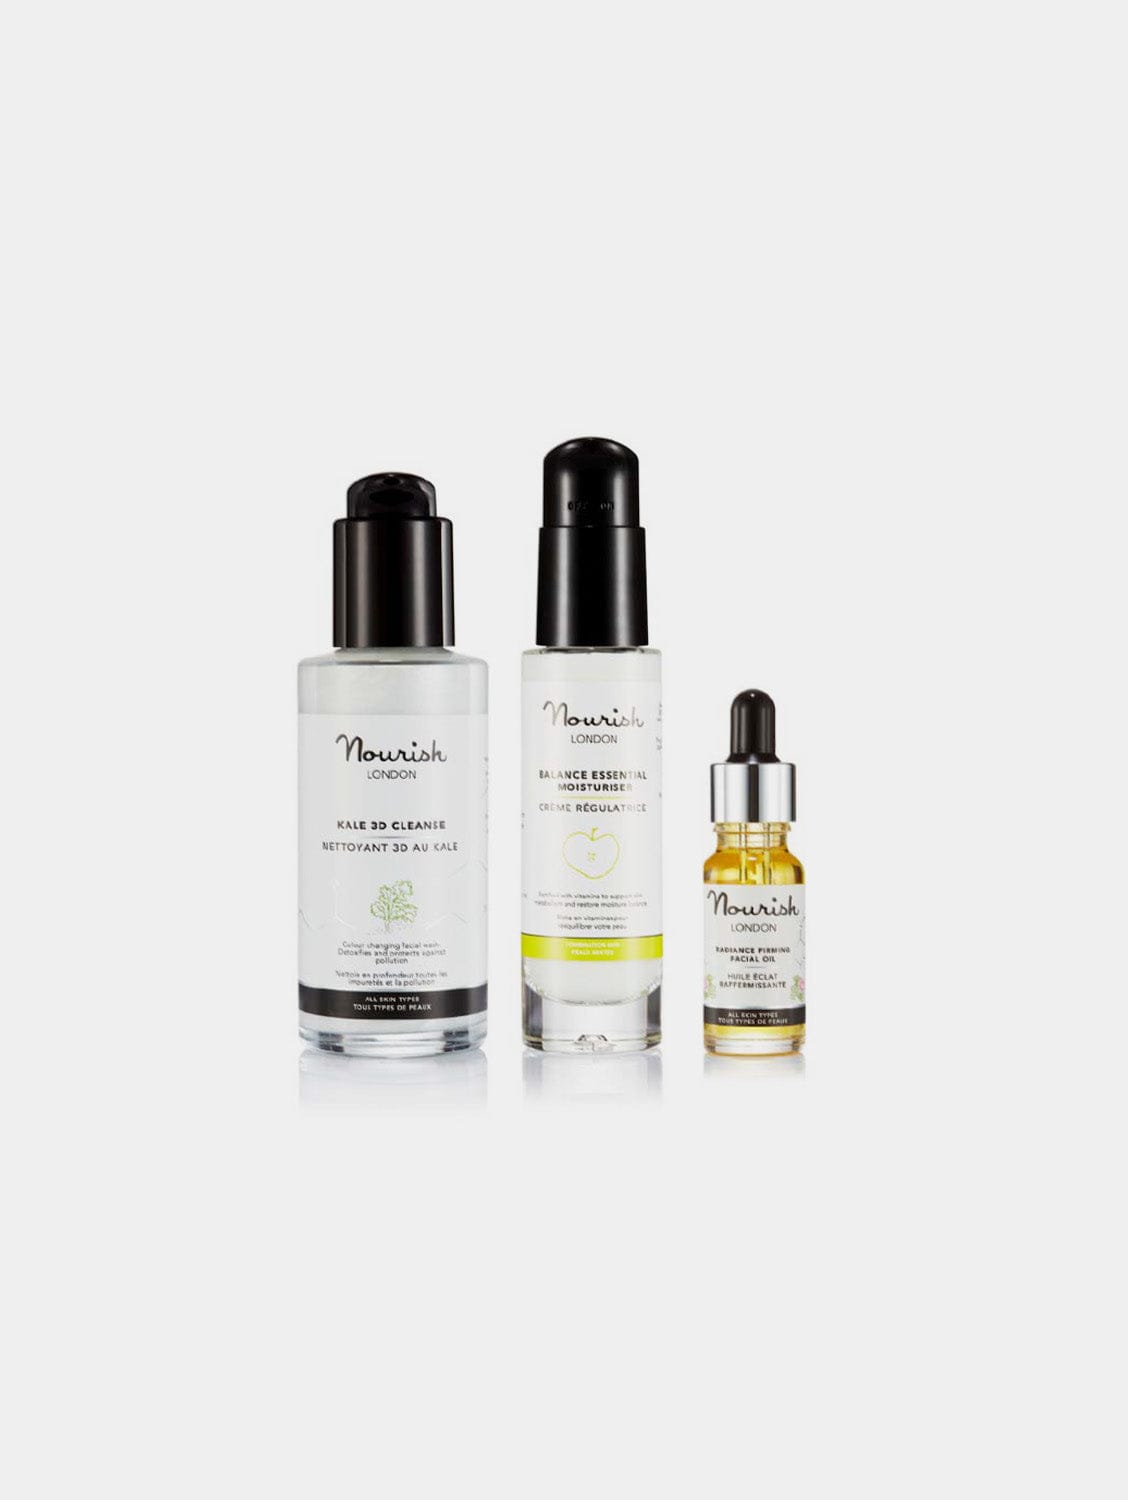 Nourish London Acne and Blemish Skincare Collection